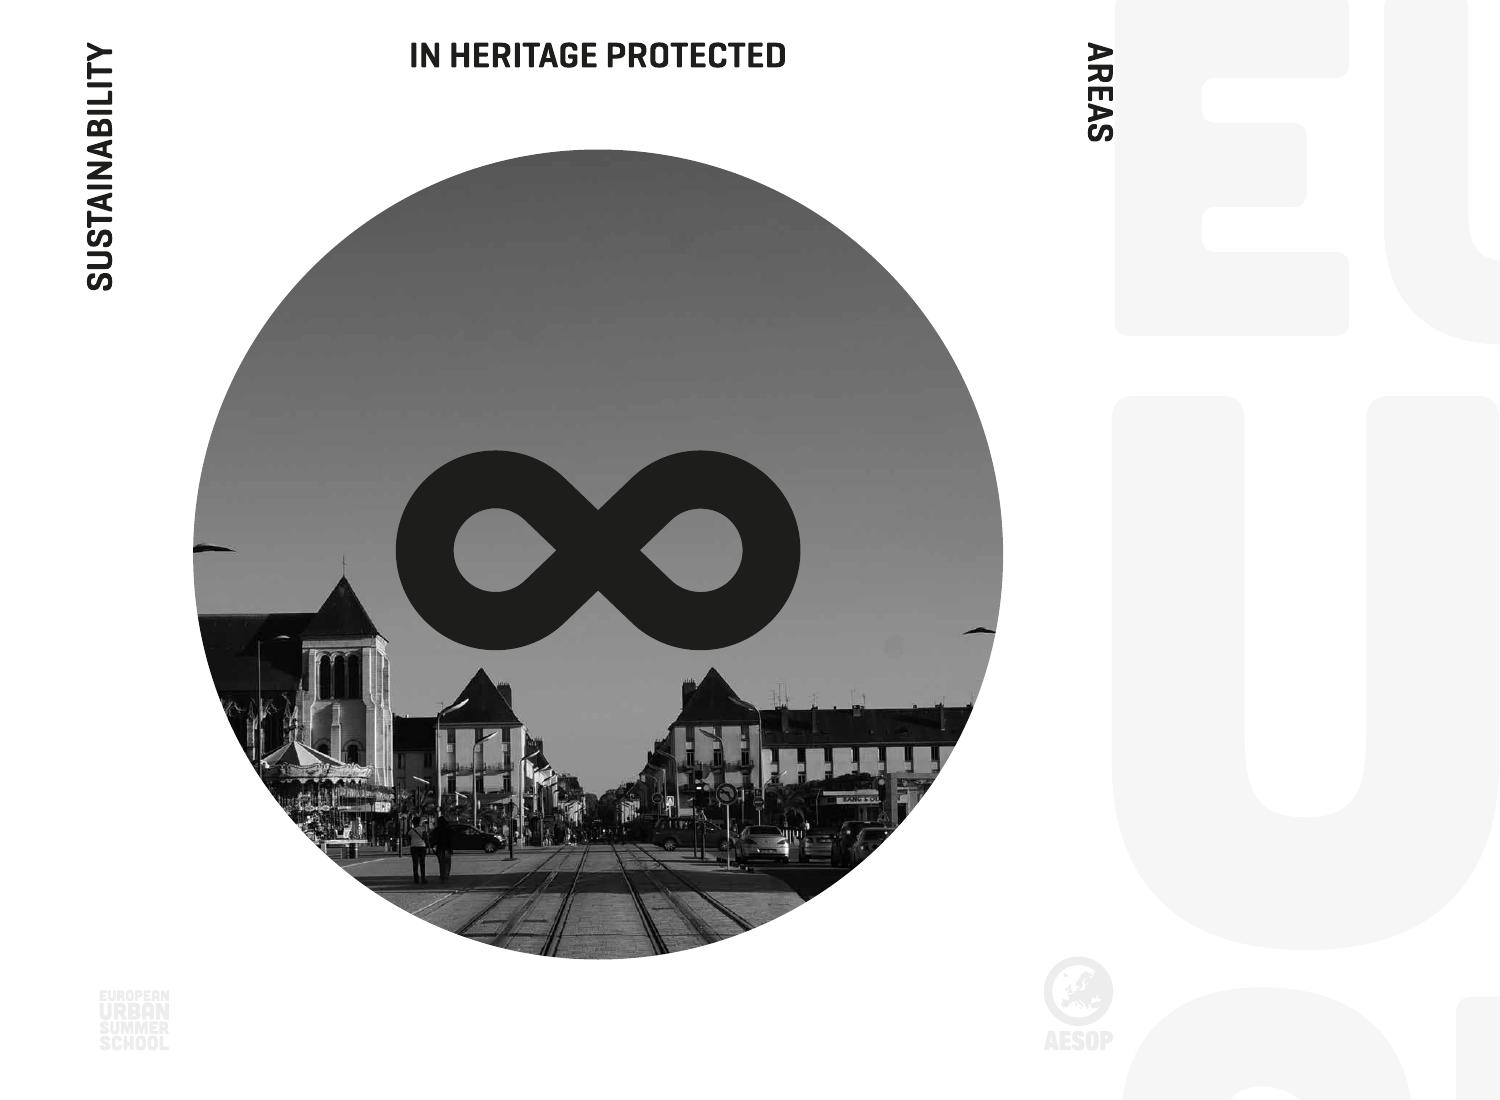 Meridienne De Jardin Unique Sustainability In Heritage Protected areas by Haveasign issuu